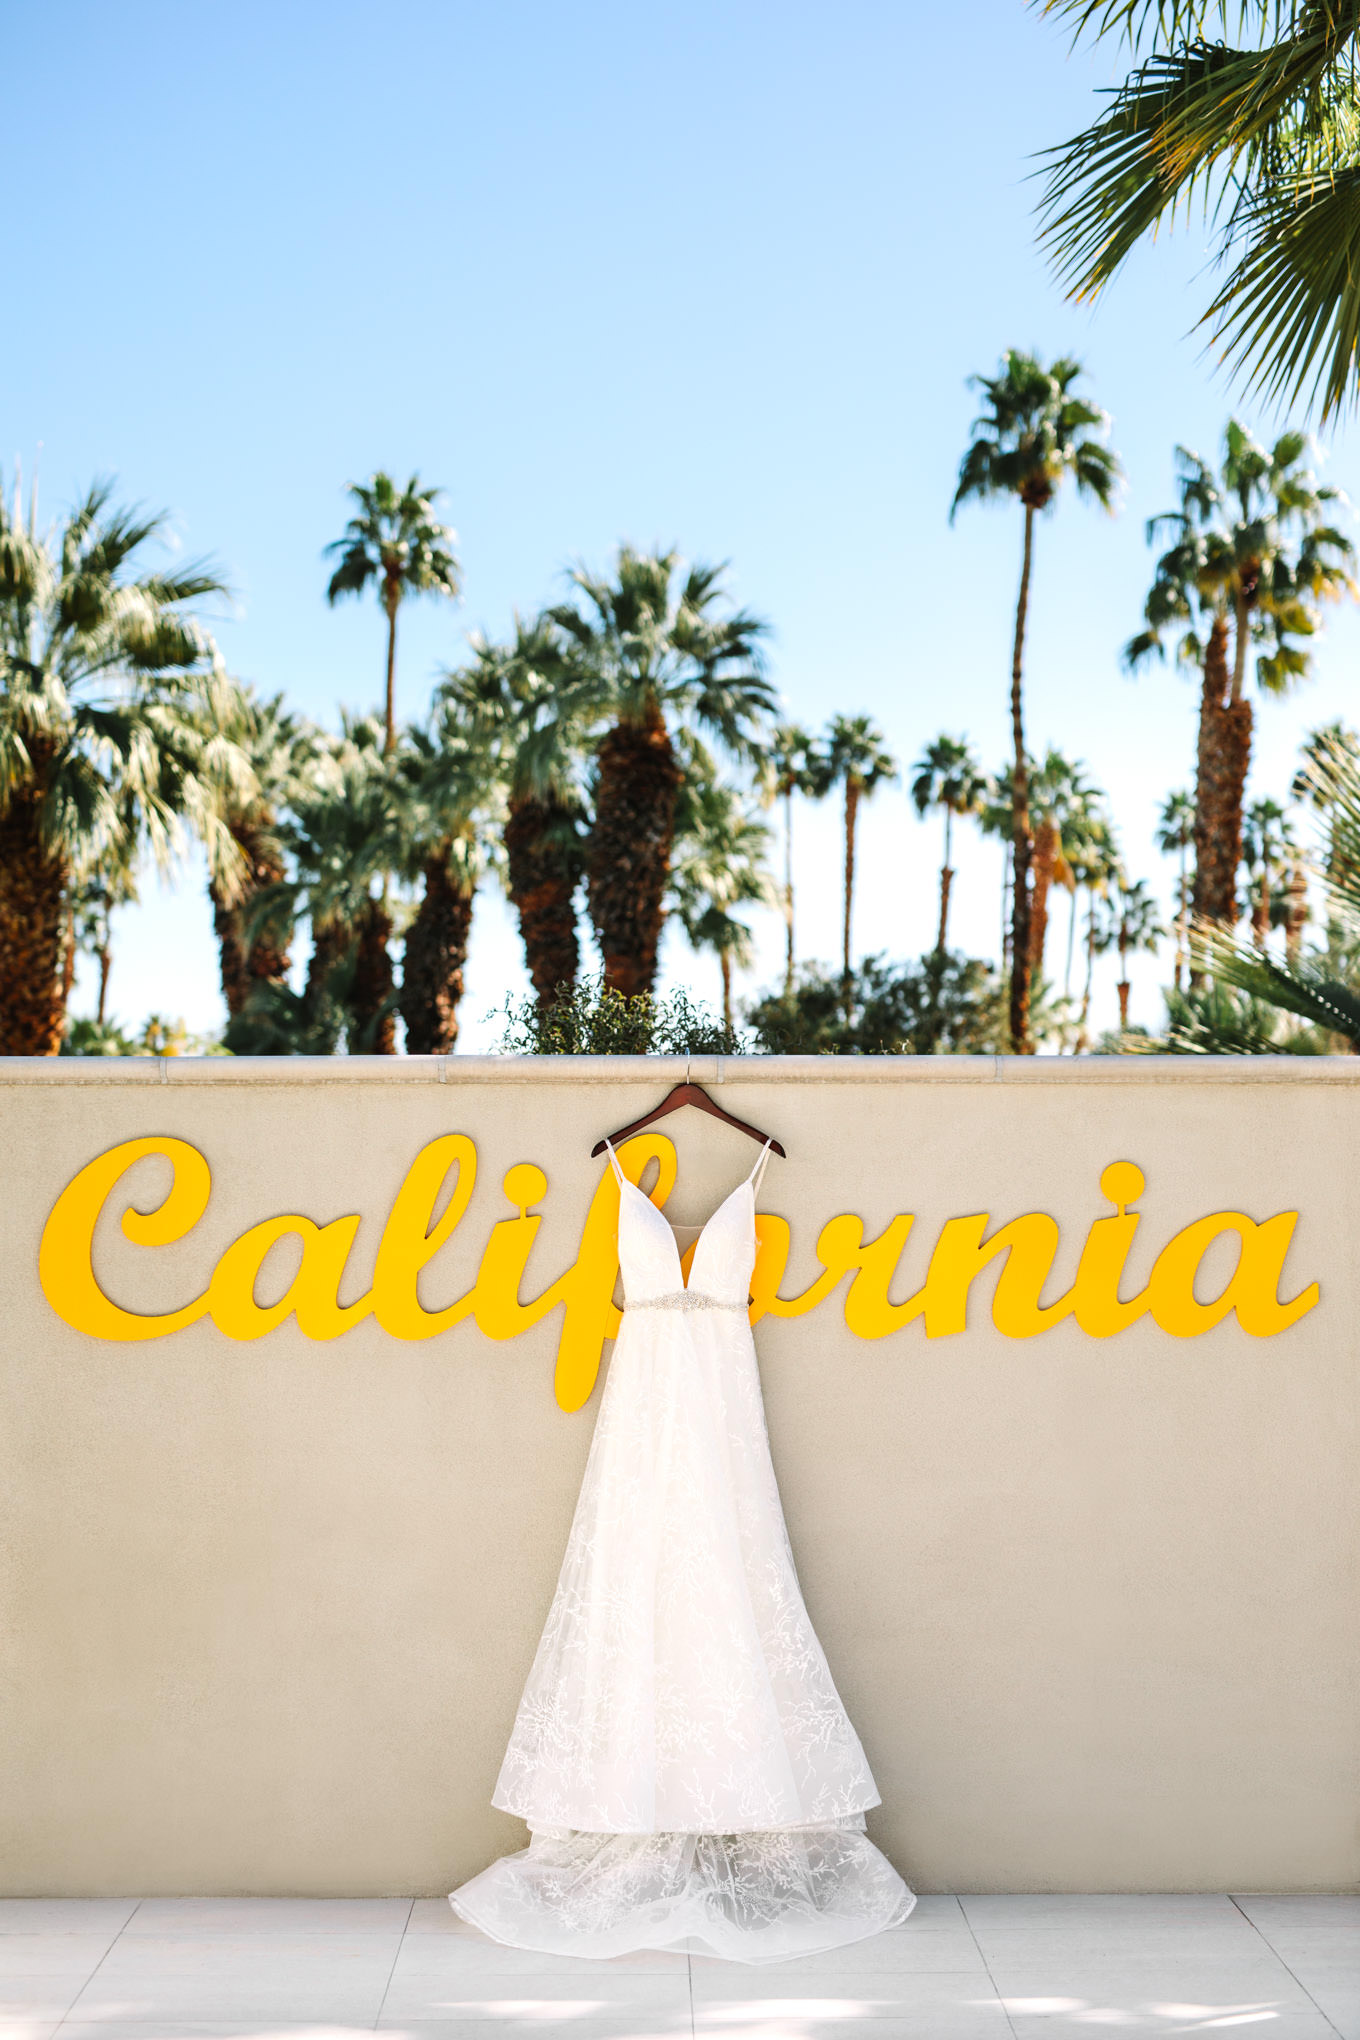 Wedding dress hanging on California sign at Hotel Paseo | Living Desert Zoo & Gardens wedding with unique details | Elevated and colorful wedding photography for fun-loving couples in Southern California |  #PalmSprings #palmspringsphotographer #gardenwedding #palmspringswedding  Source: Mary Costa Photography | Los Angeles wedding photographer 